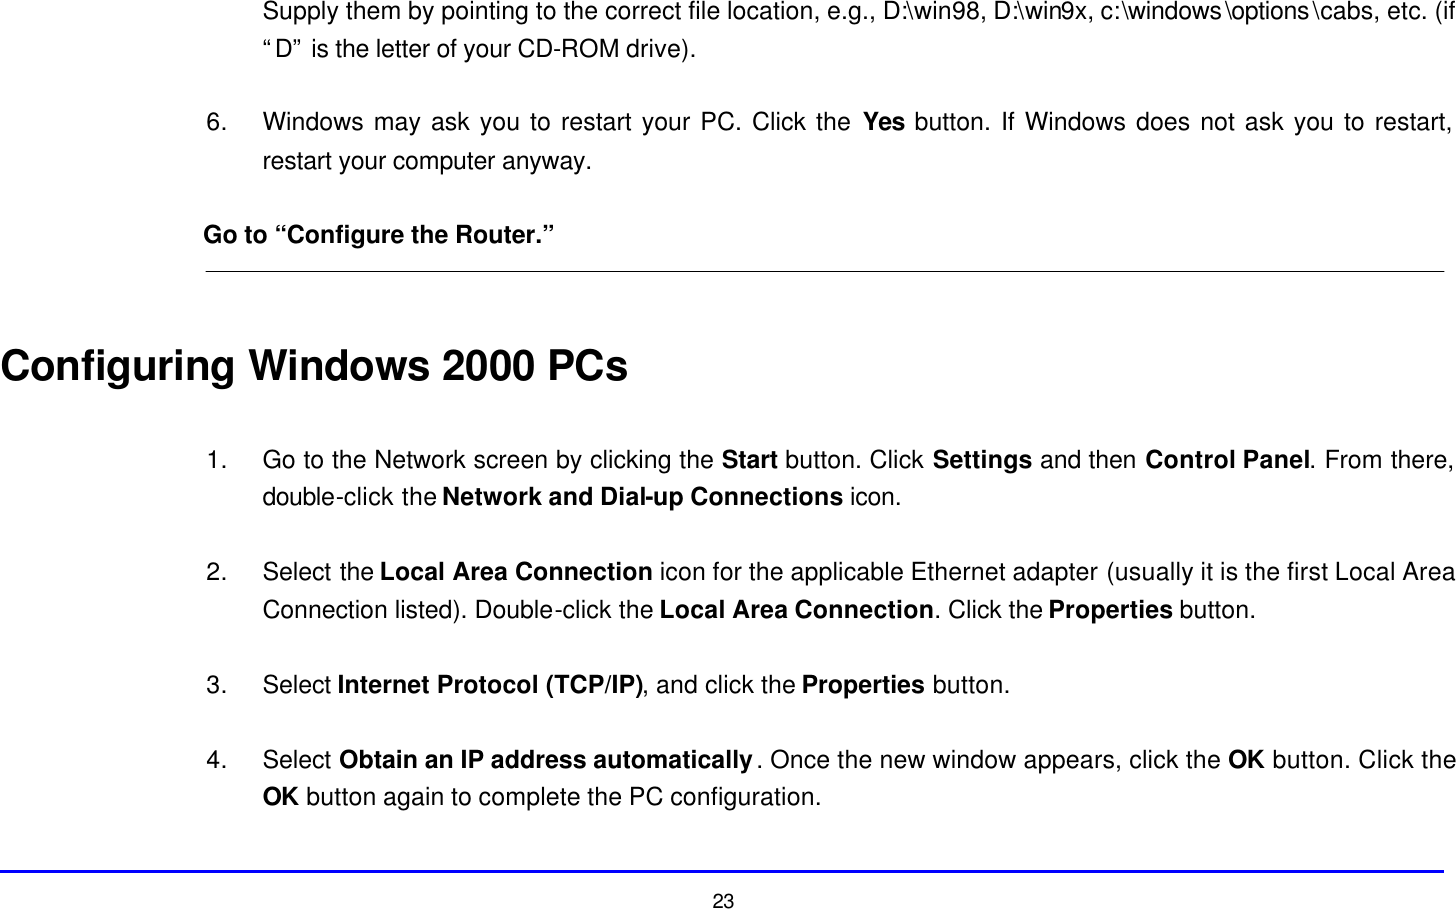  23 Supply them by pointing to the correct file location, e.g., D:\win98, D:\win9x, c:\windows\options\cabs, etc. (if “D” is the letter of your CD-ROM drive).  6. Windows may ask you to restart your PC. Click the Yes button. If Windows does not ask you to restart, restart your computer anyway.  Go to “Configure the Router.”   Configuring Windows 2000 PCs  1. Go to the Network screen by clicking the Start button. Click Settings and then Control Panel. From there, double-click the Network and Dial-up Connections icon.  2. Select the Local Area Connection icon for the applicable Ethernet adapter (usually it is the first Local Area Connection listed). Double-click the Local Area Connection. Click the Properties button.  3. Select Internet Protocol (TCP/IP), and click the Properties button.  4. Select Obtain an IP address automatically. Once the new window appears, click the OK button. Click the OK button again to complete the PC configuration.  